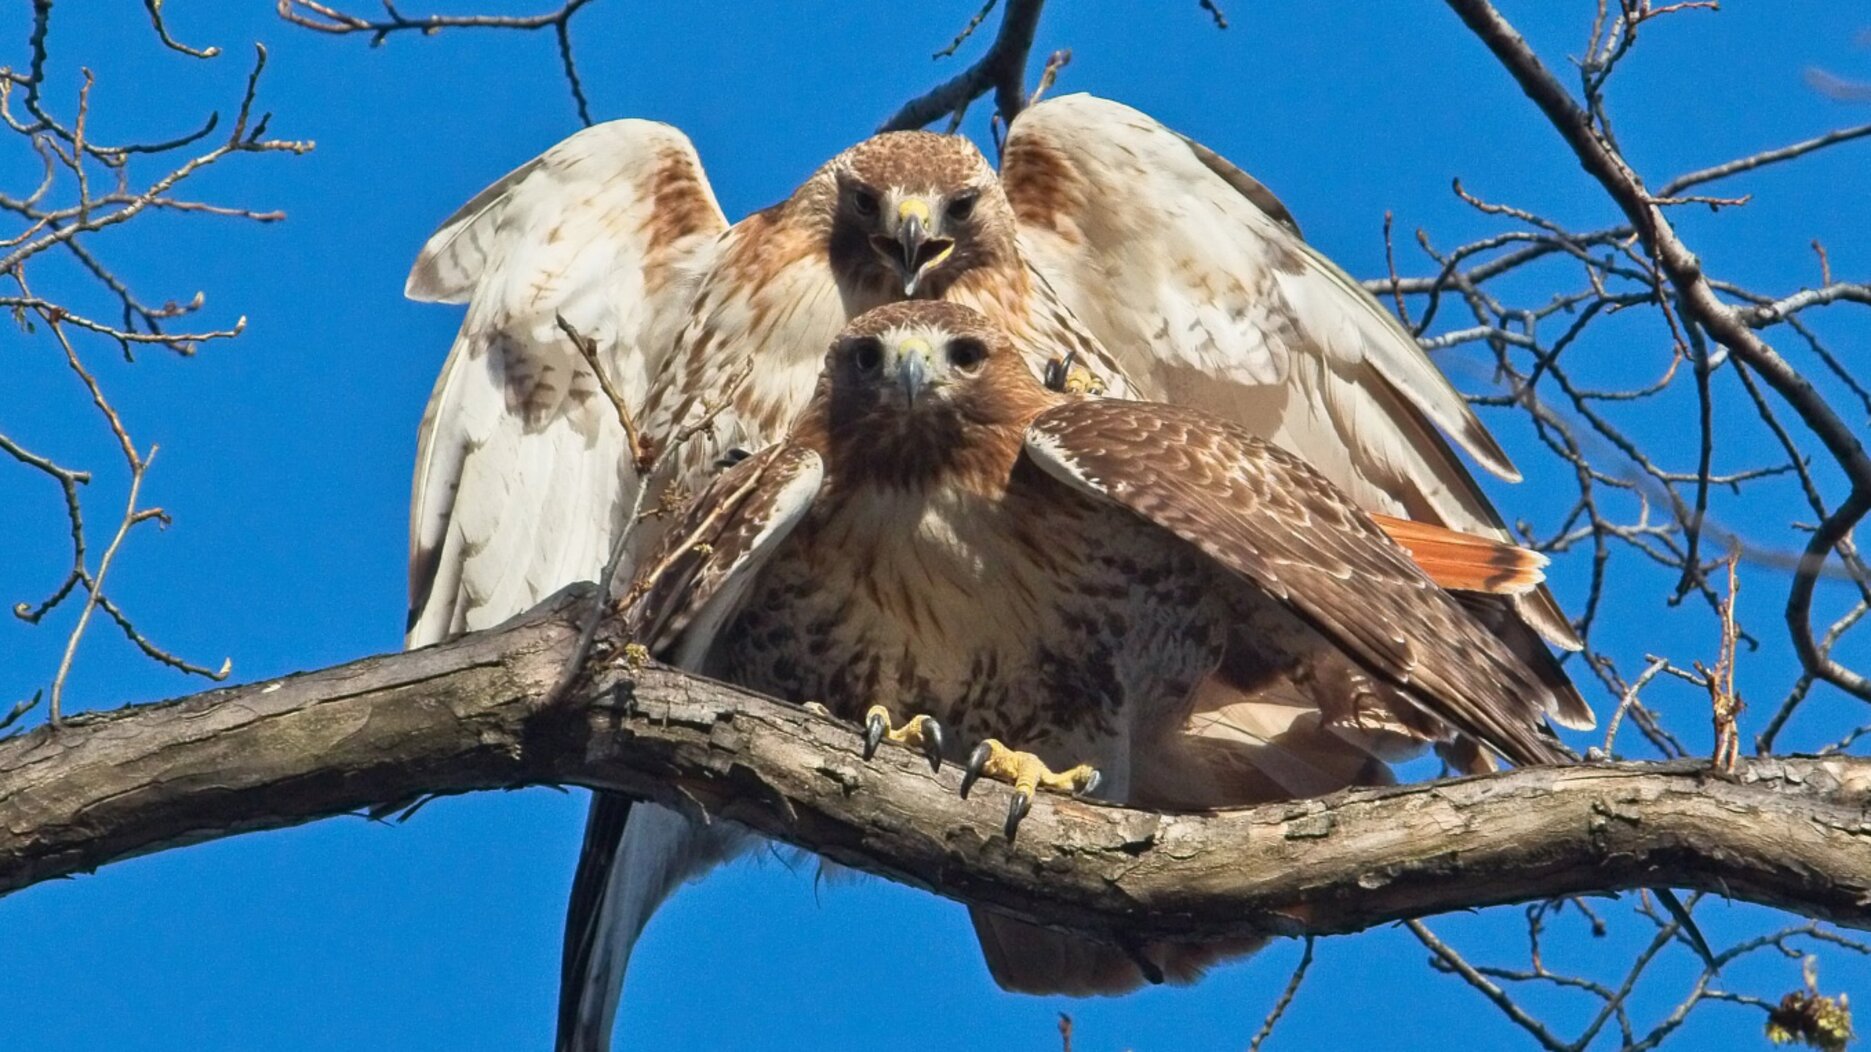 Red-tailed Hawks in Tree at Tompkins Square Park. Photo: <a href="http://www.gogginphotography.com/" target="_blank">Laura Goggin</a>